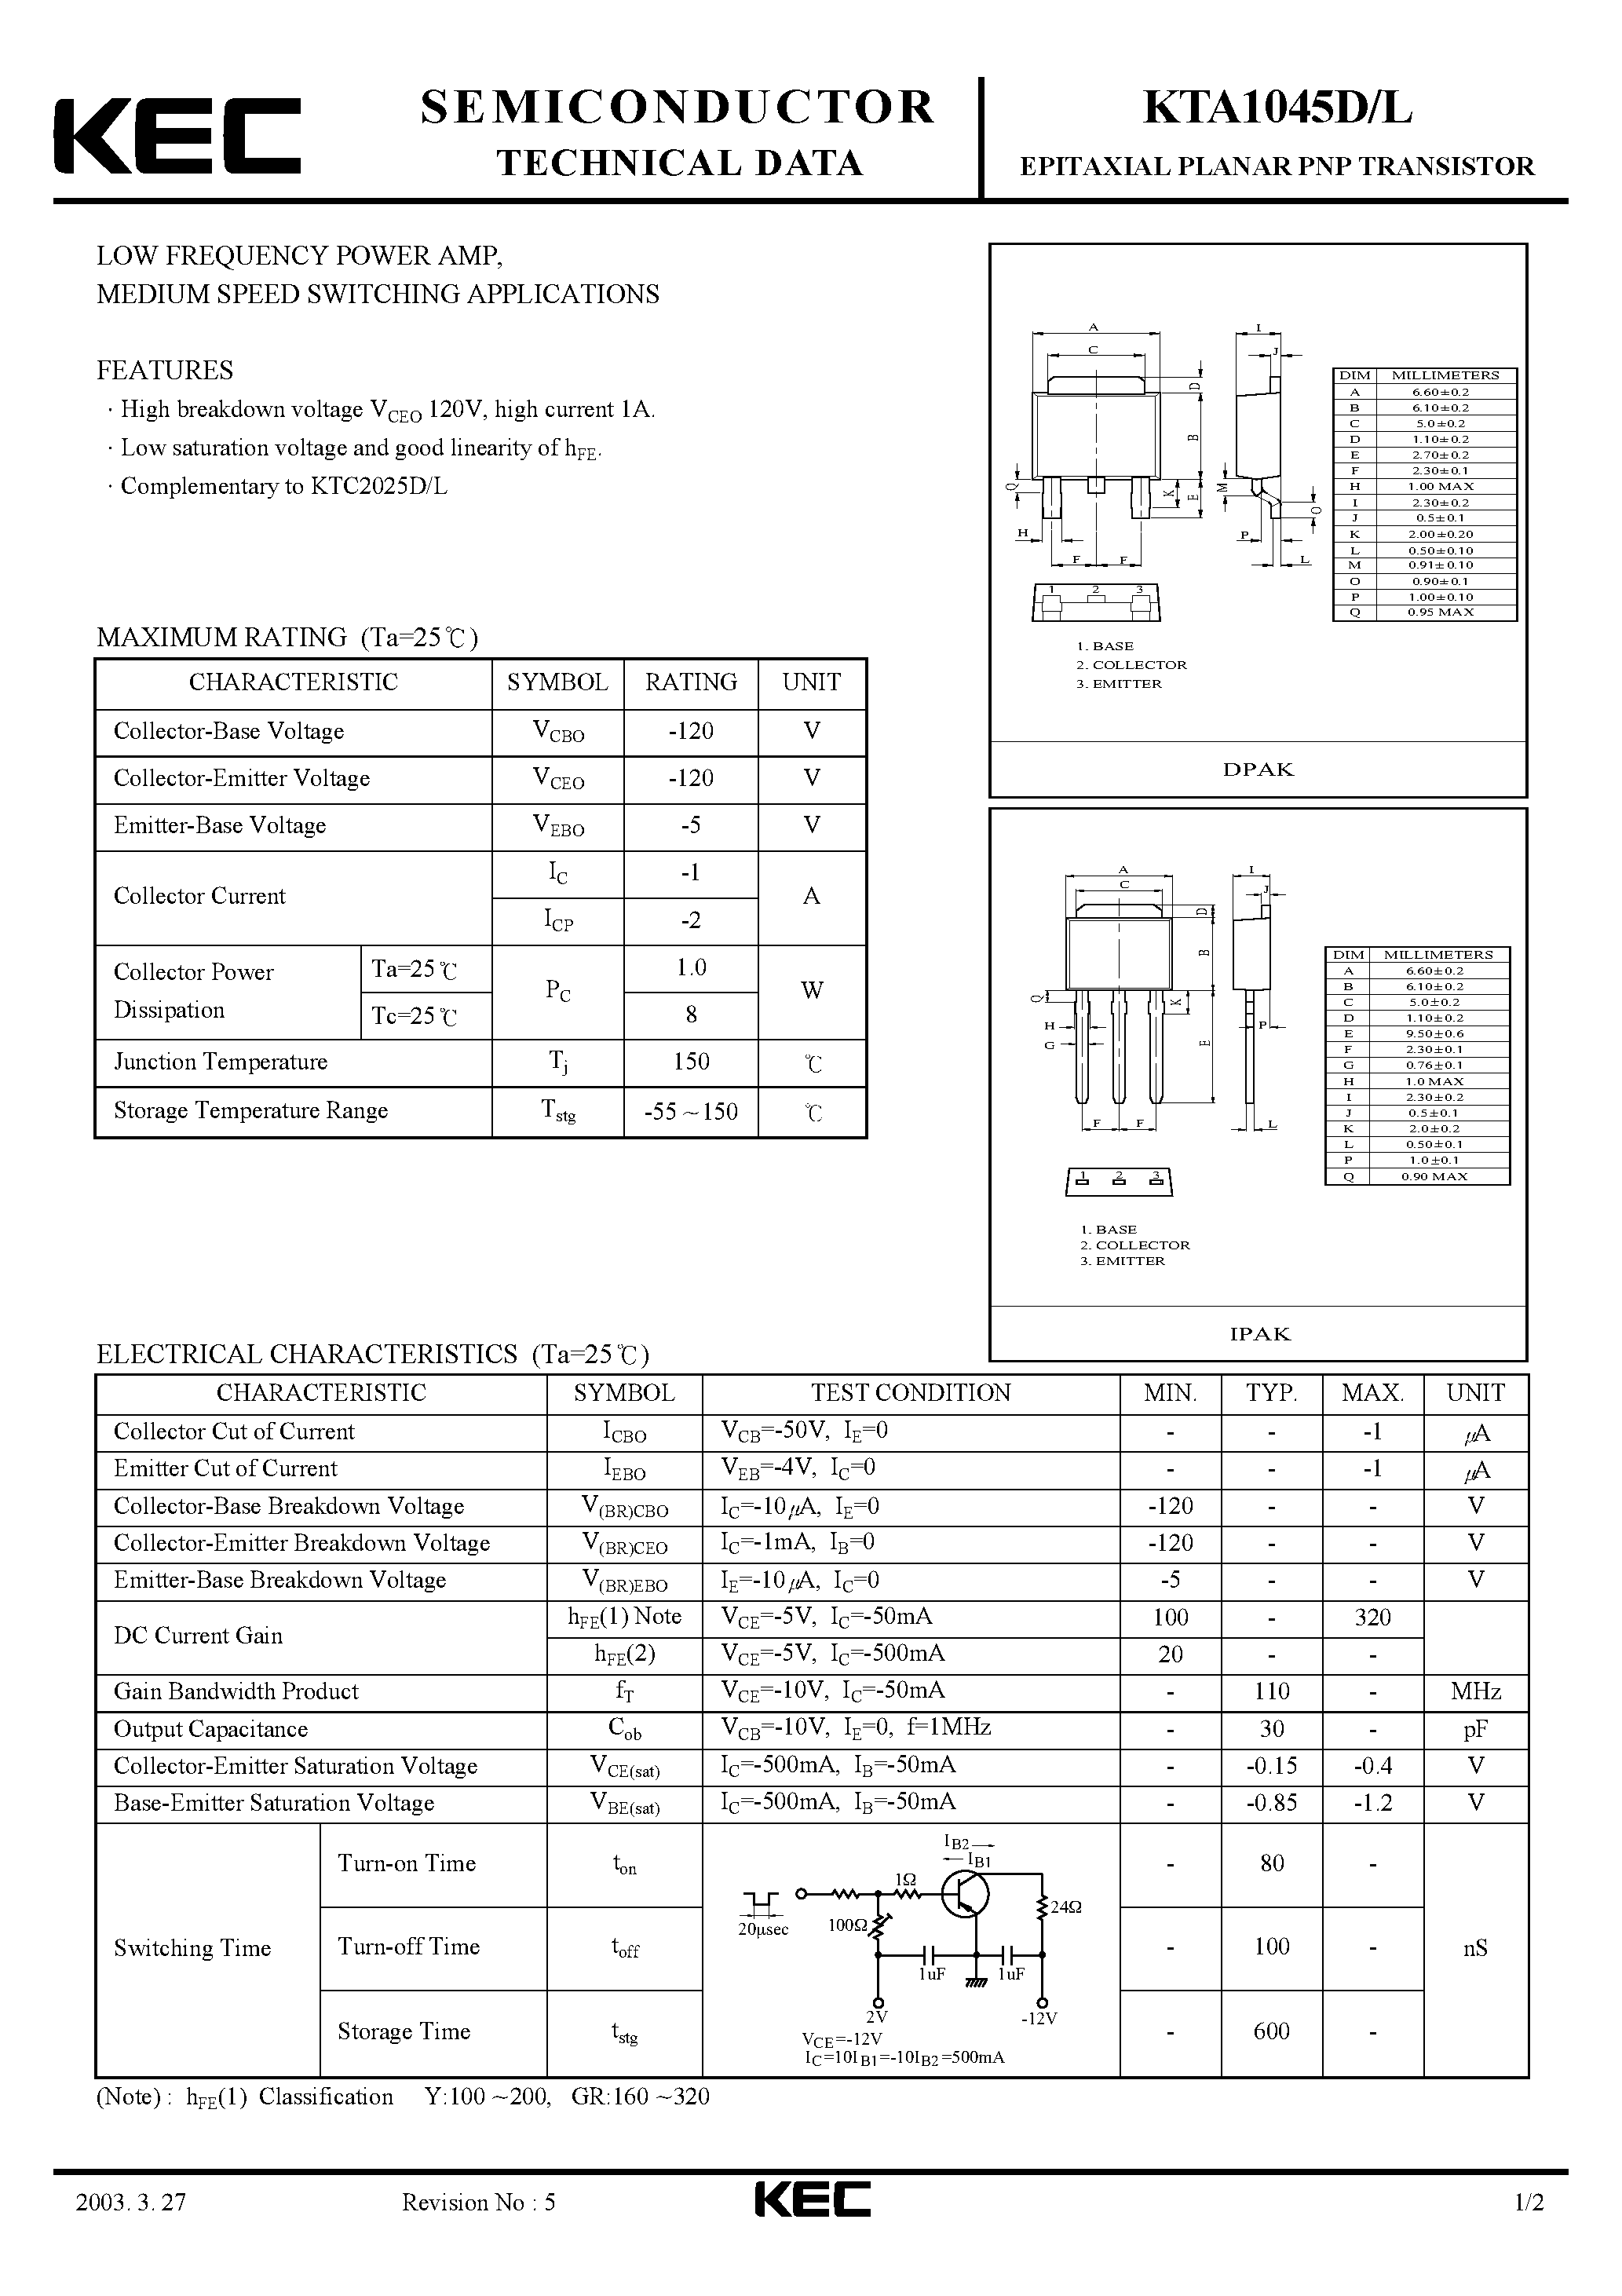 Datasheet KTA1045D - EPITAXIAL PLANAR PNP TRANSISTOR (LOW FREQUENCY POWER AMP/ MEDIUM SPEED SWITCHING) page 1